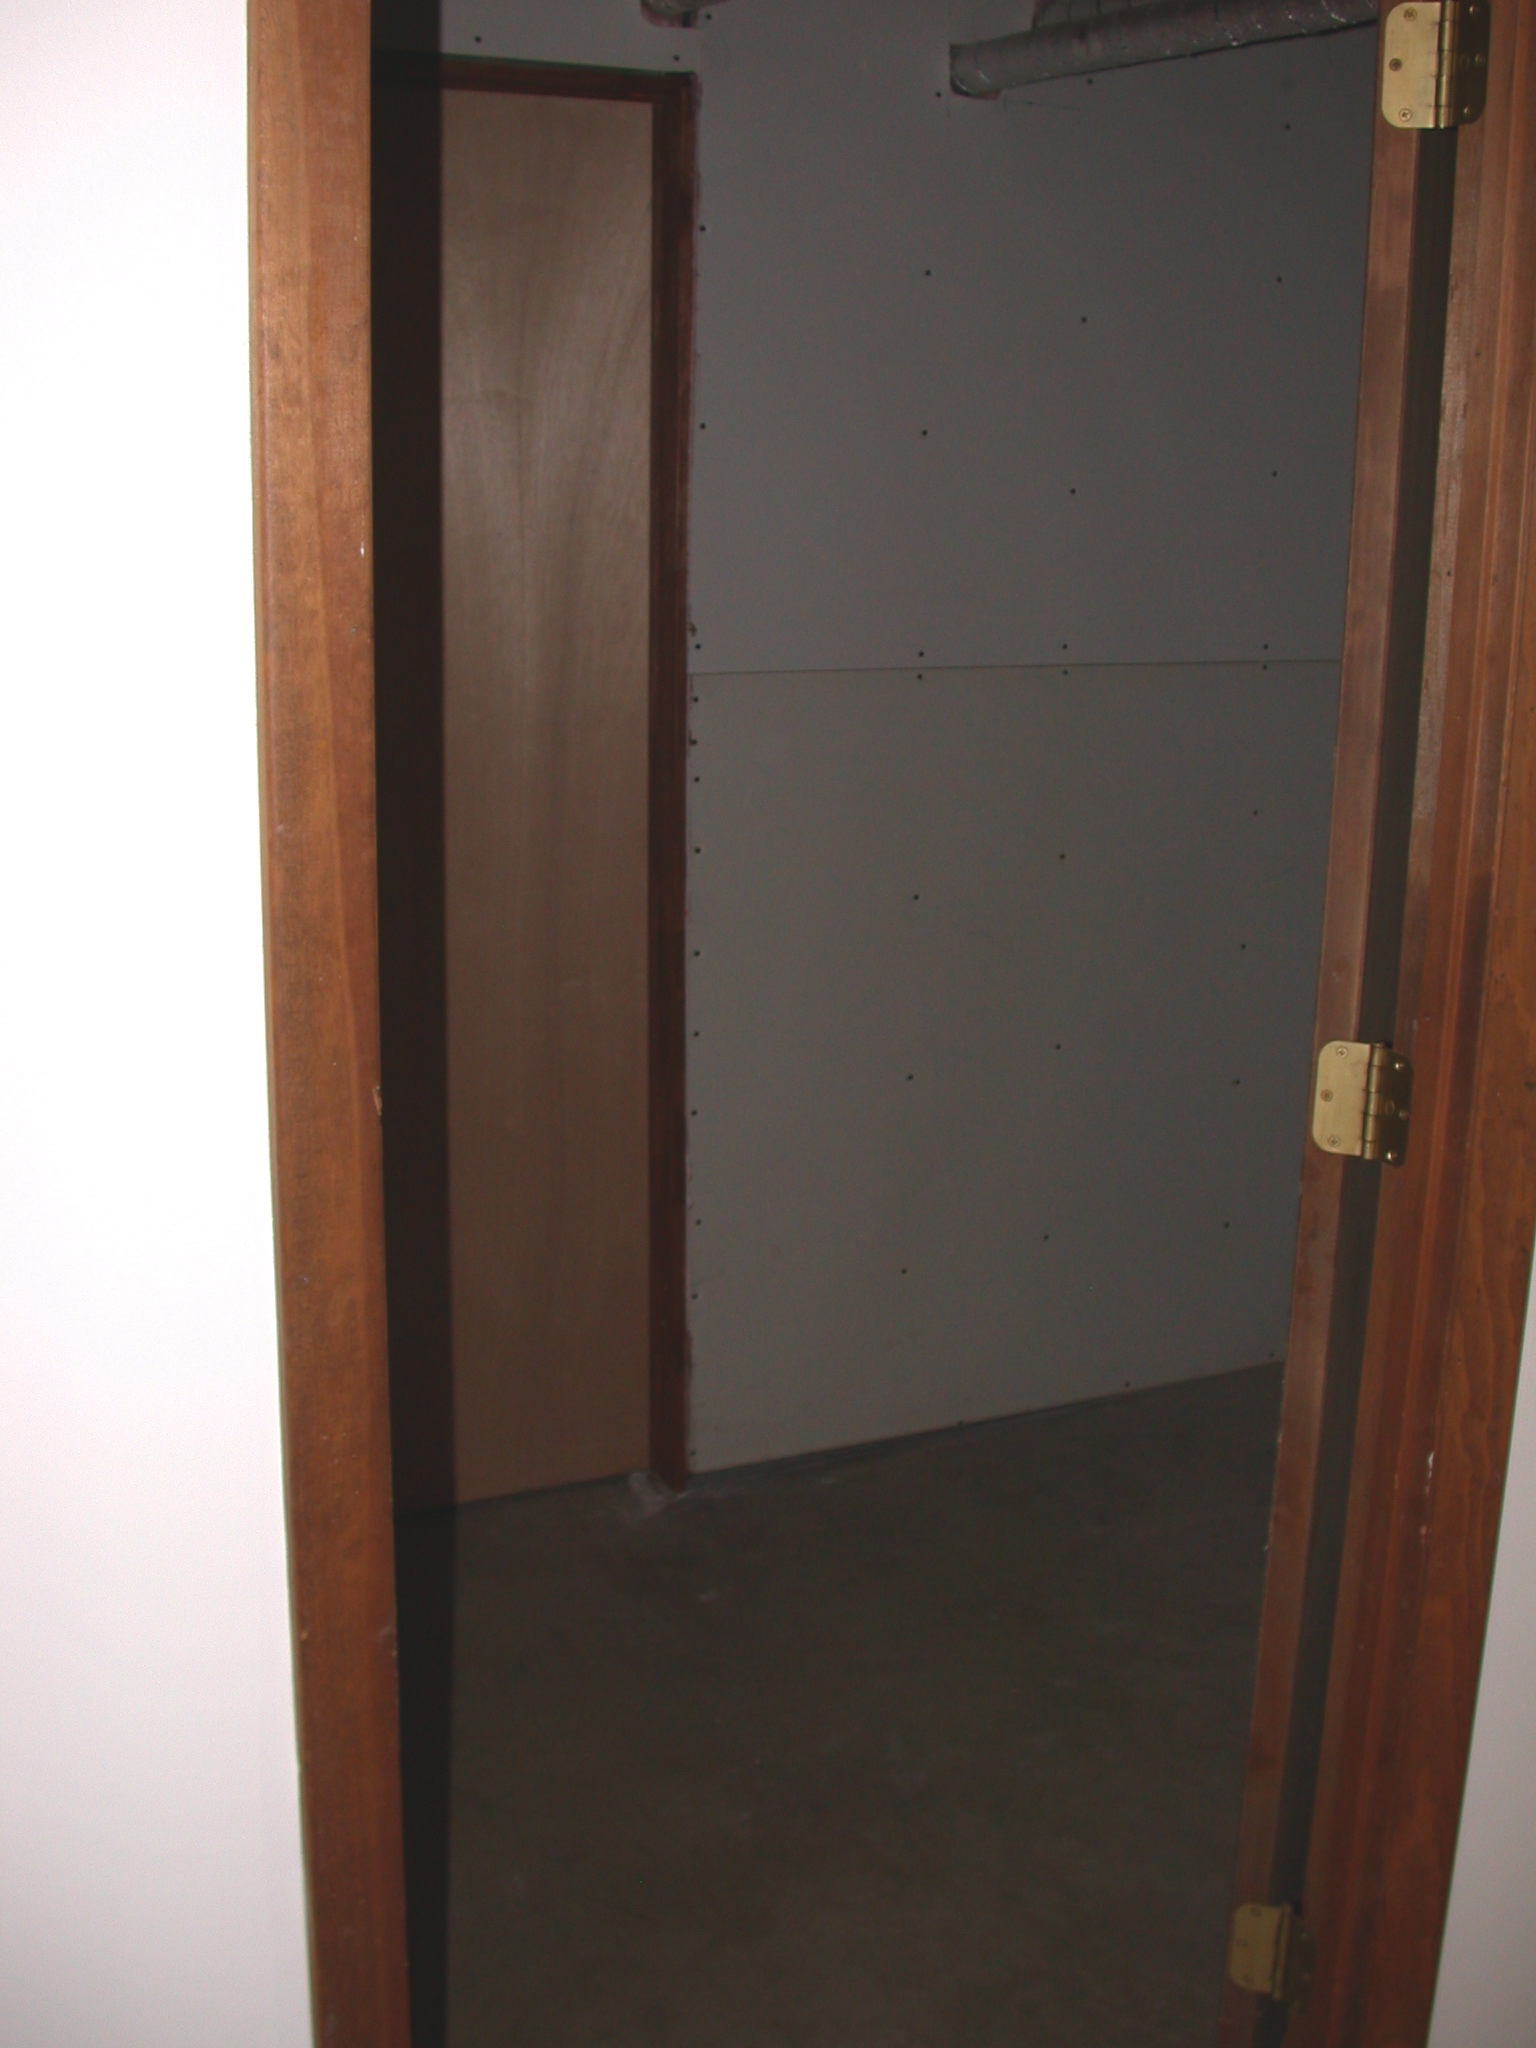 Doorway to Storage Room--View to Right